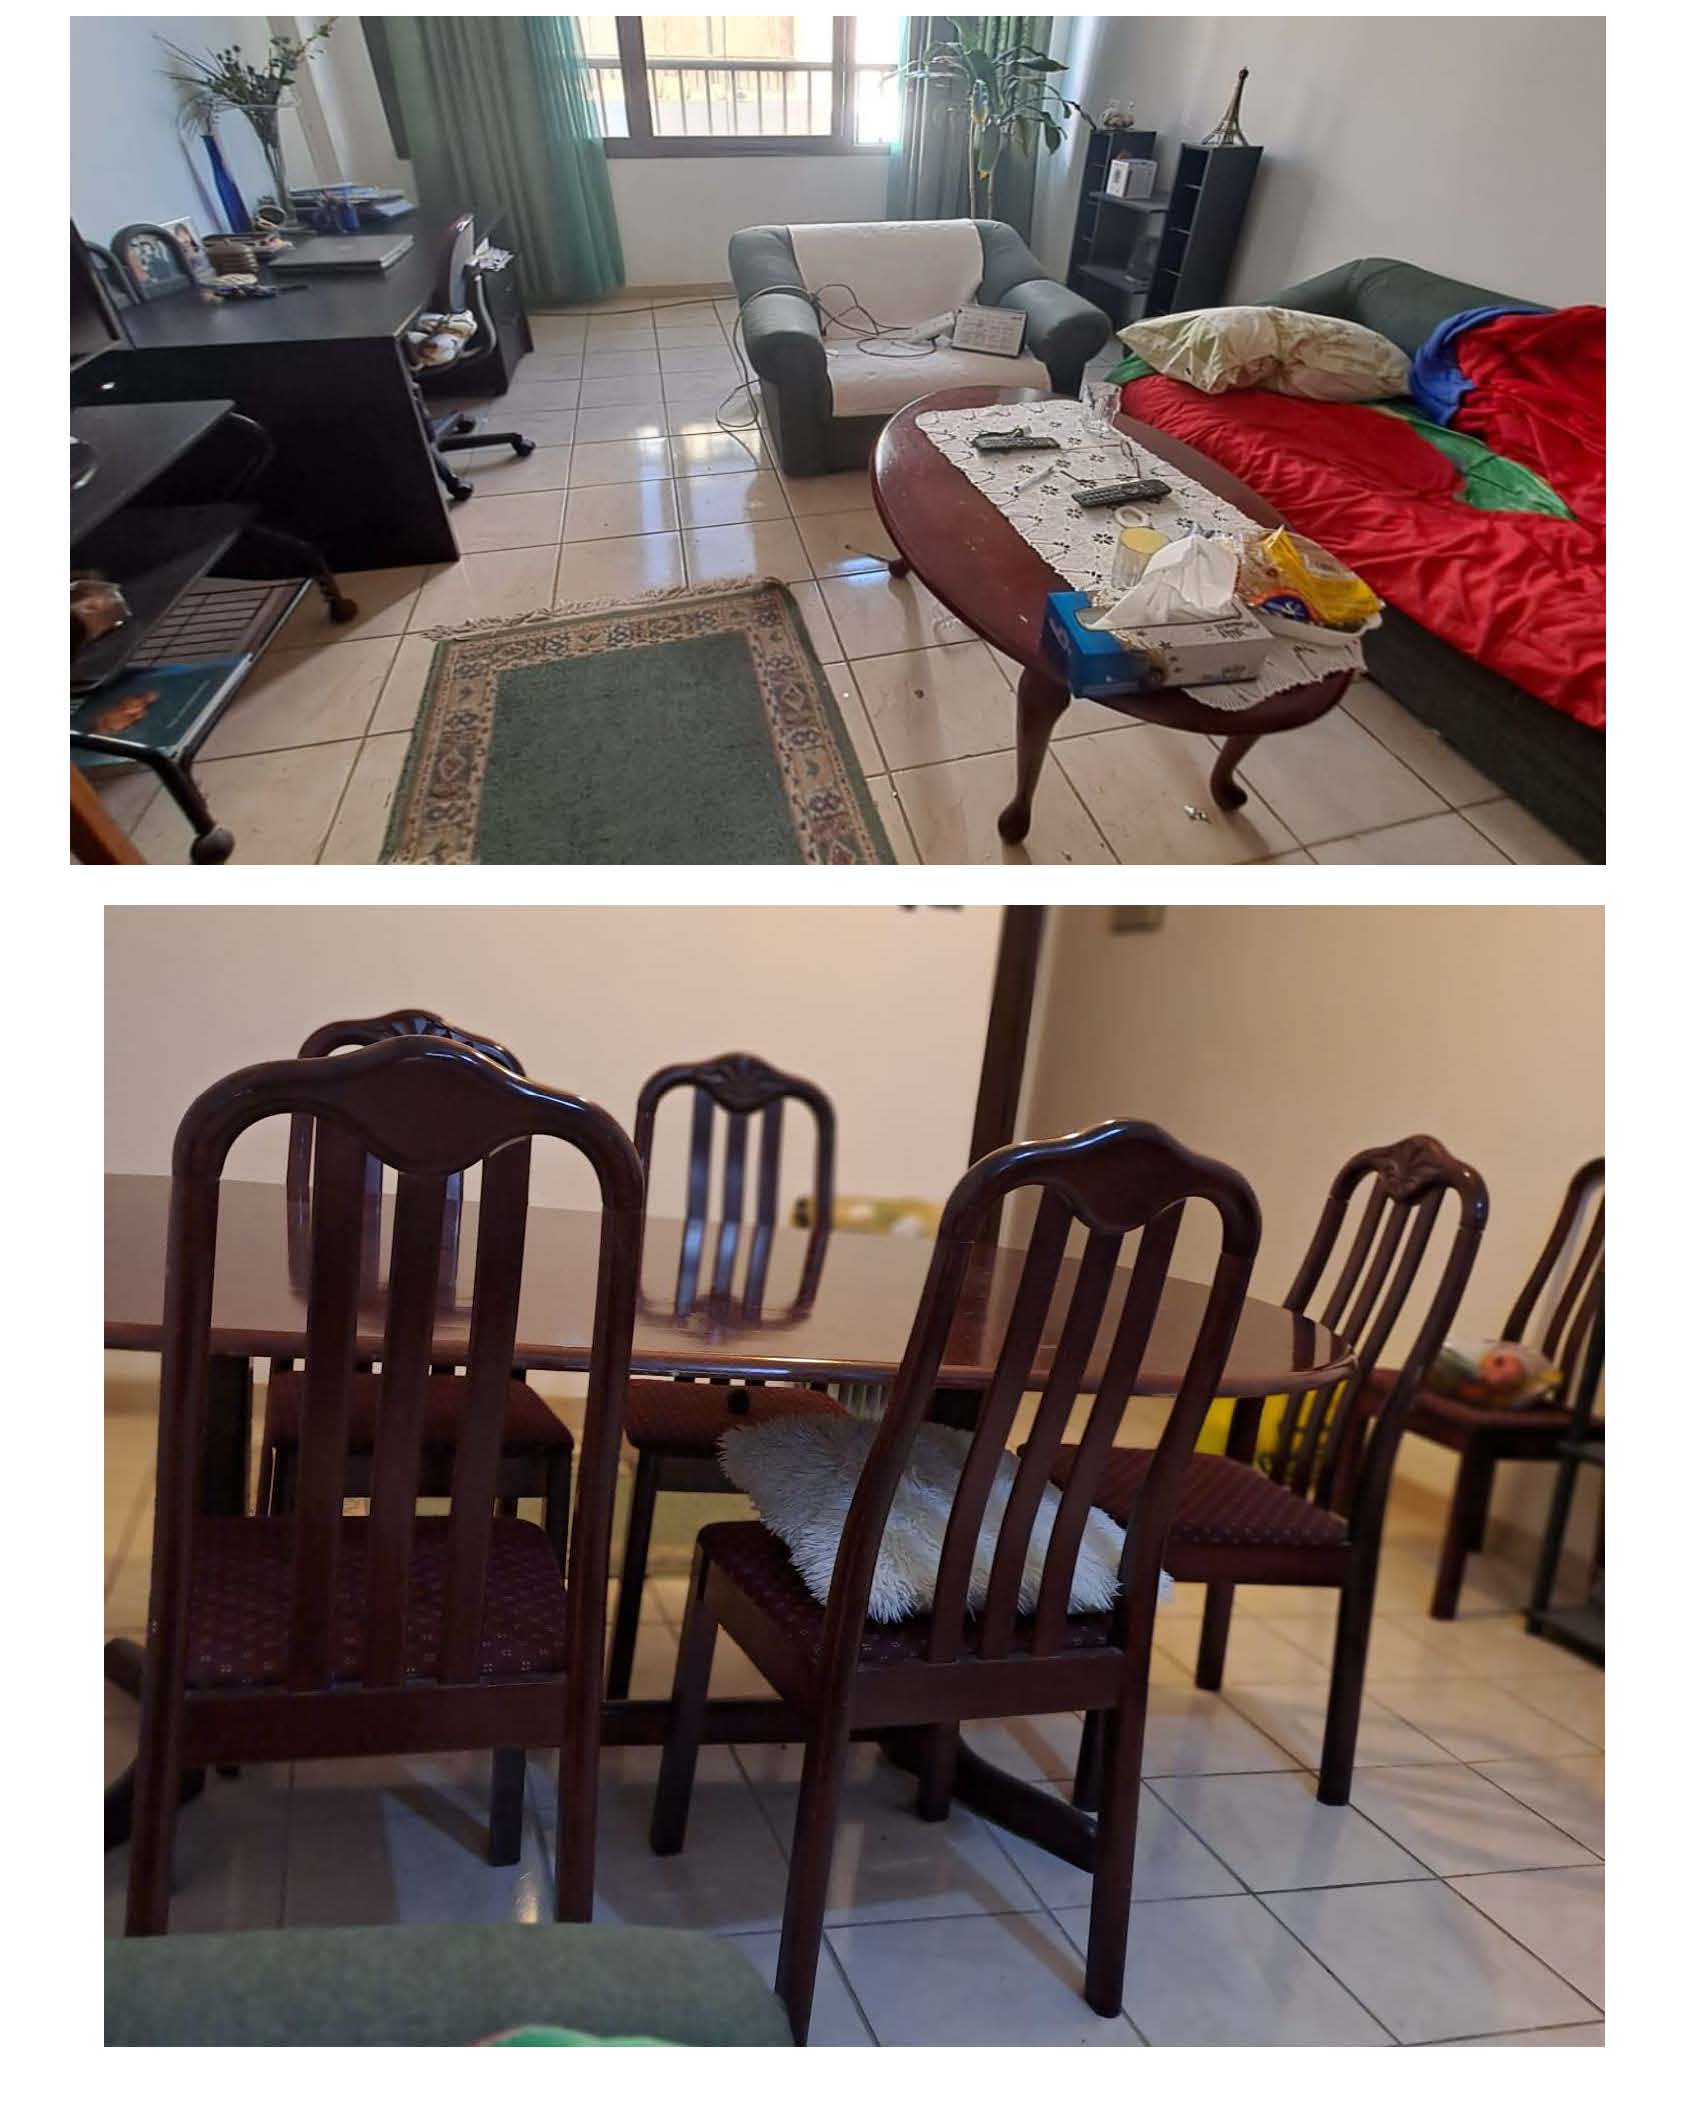 FURNITURE FOR SALE